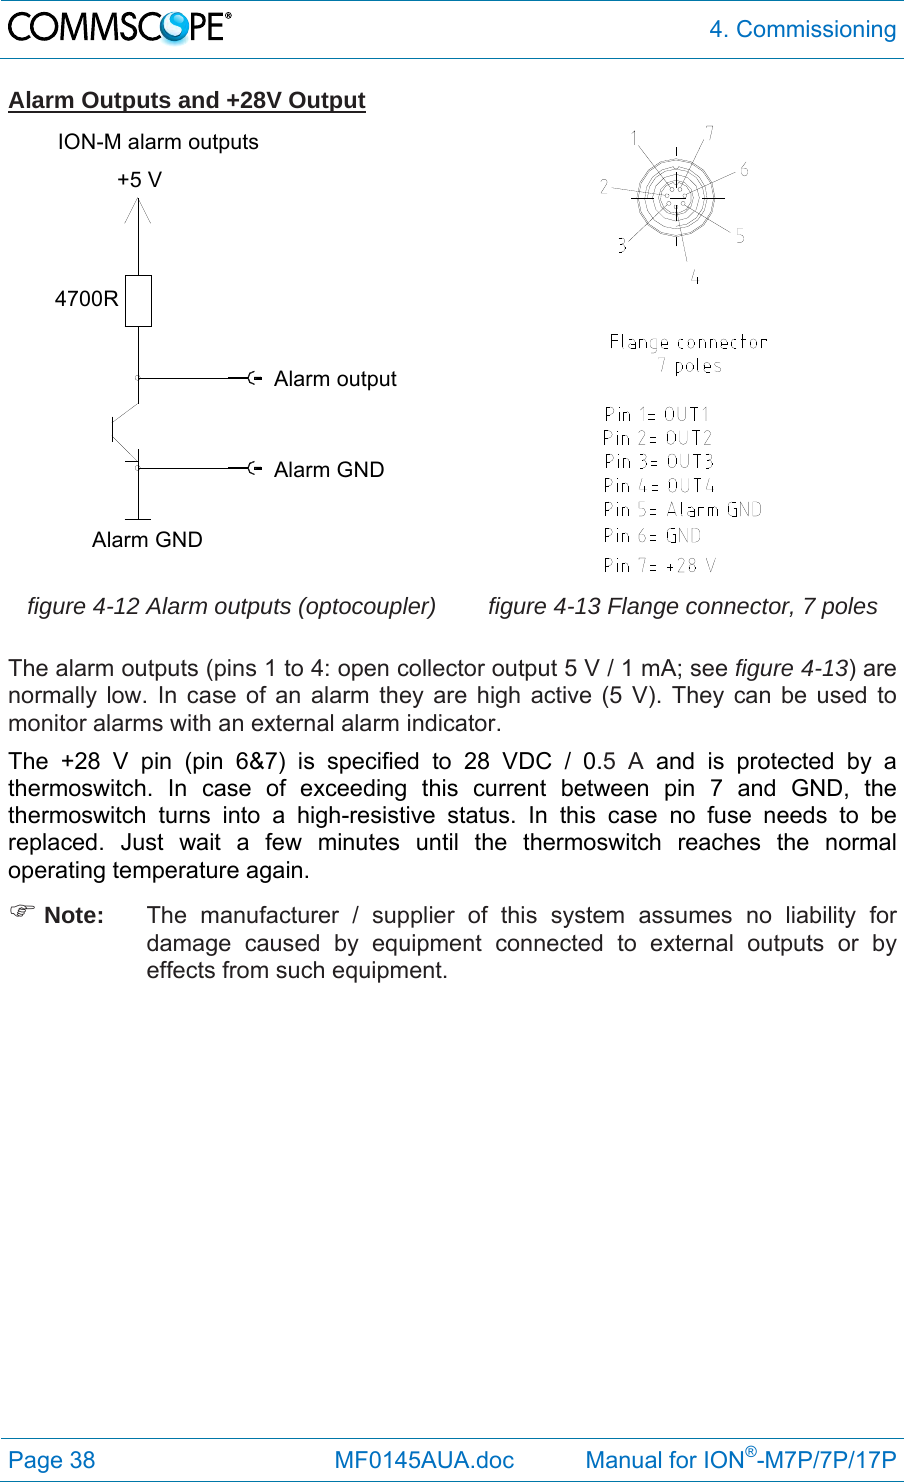  4. Commissioning Page 38              MF0145AUA.doc           Manual for ION®-M7P/7P/17P Alarm Outputs and +28V Output Alarm outputAlarm GNDAlarm GNDION-M alarm outputs4700R+5 V  figure 4-12 Alarm outputs (optocoupler)  figure 4-13 Flange connector, 7 poles The alarm outputs (pins 1 to 4: open collector output 5 V / 1 mA; see figure 4-13) are normally low. In case of an alarm they are high active (5 V). They can be used to monitor alarms with an external alarm indicator.  The +28 V pin (pin 6&amp;7) is specified to 28 VDC / 0.5 A and is protected by a thermoswitch. In case of exceeding this current between pin 7 and GND, the thermoswitch turns into a high-resistive status. In this case no fuse needs to be replaced. Just wait a few minutes until the thermoswitch reaches the normal operating temperature again.   Note:  The manufacturer / supplier of this system assumes no liability for damage caused by equipment connected to external outputs or by effects from such equipment.   